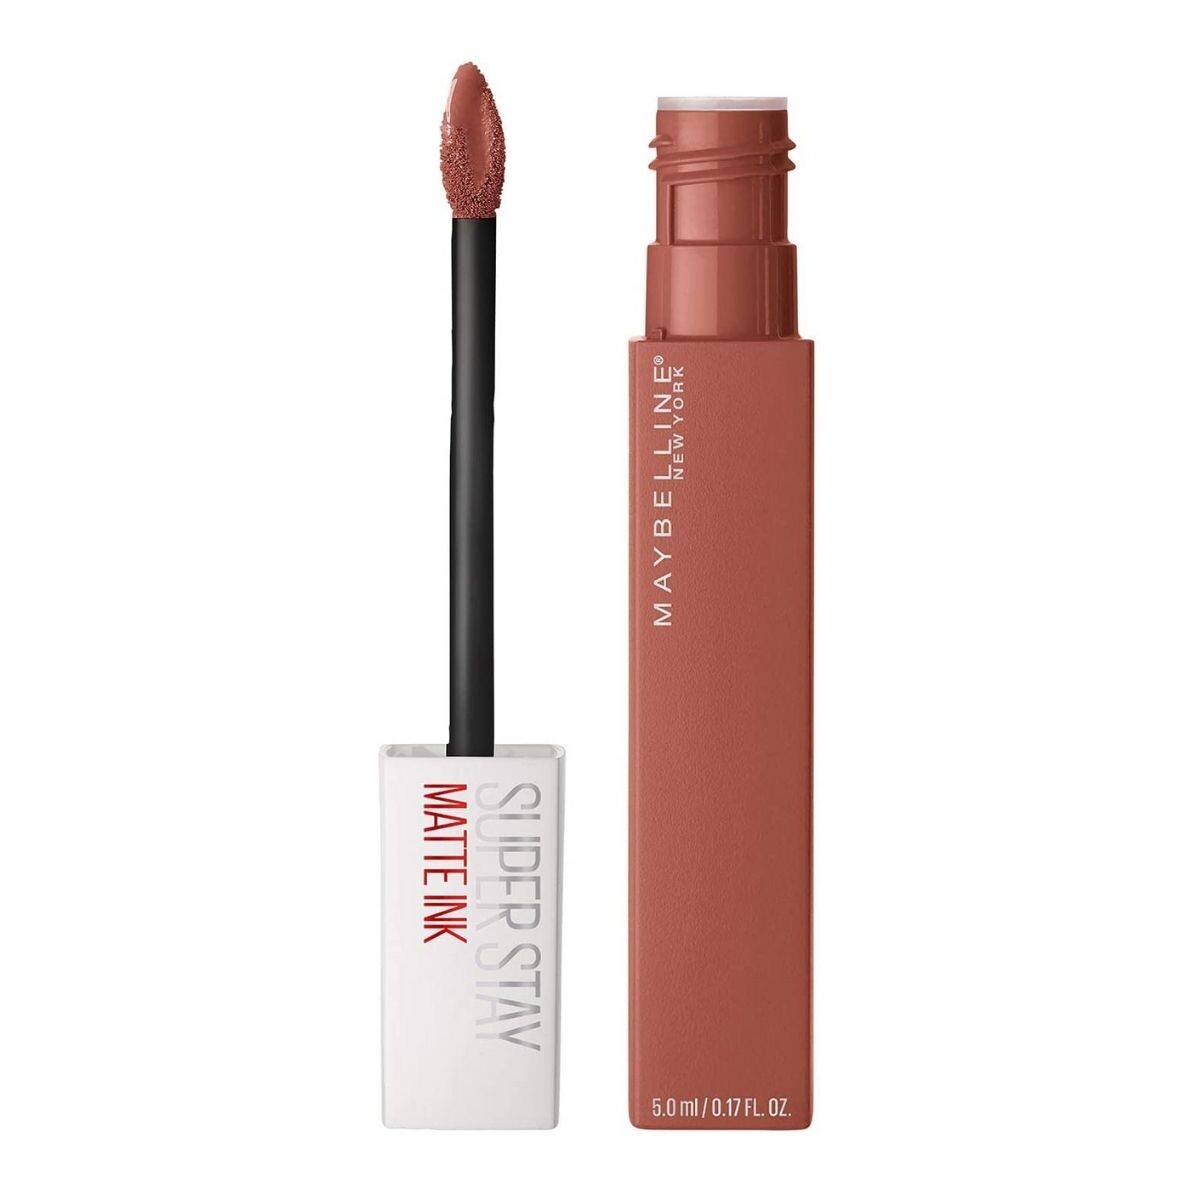 Labial Maybelline Super Stay Matte Ink Birthday Edition Life Of The Party  390 — Coral